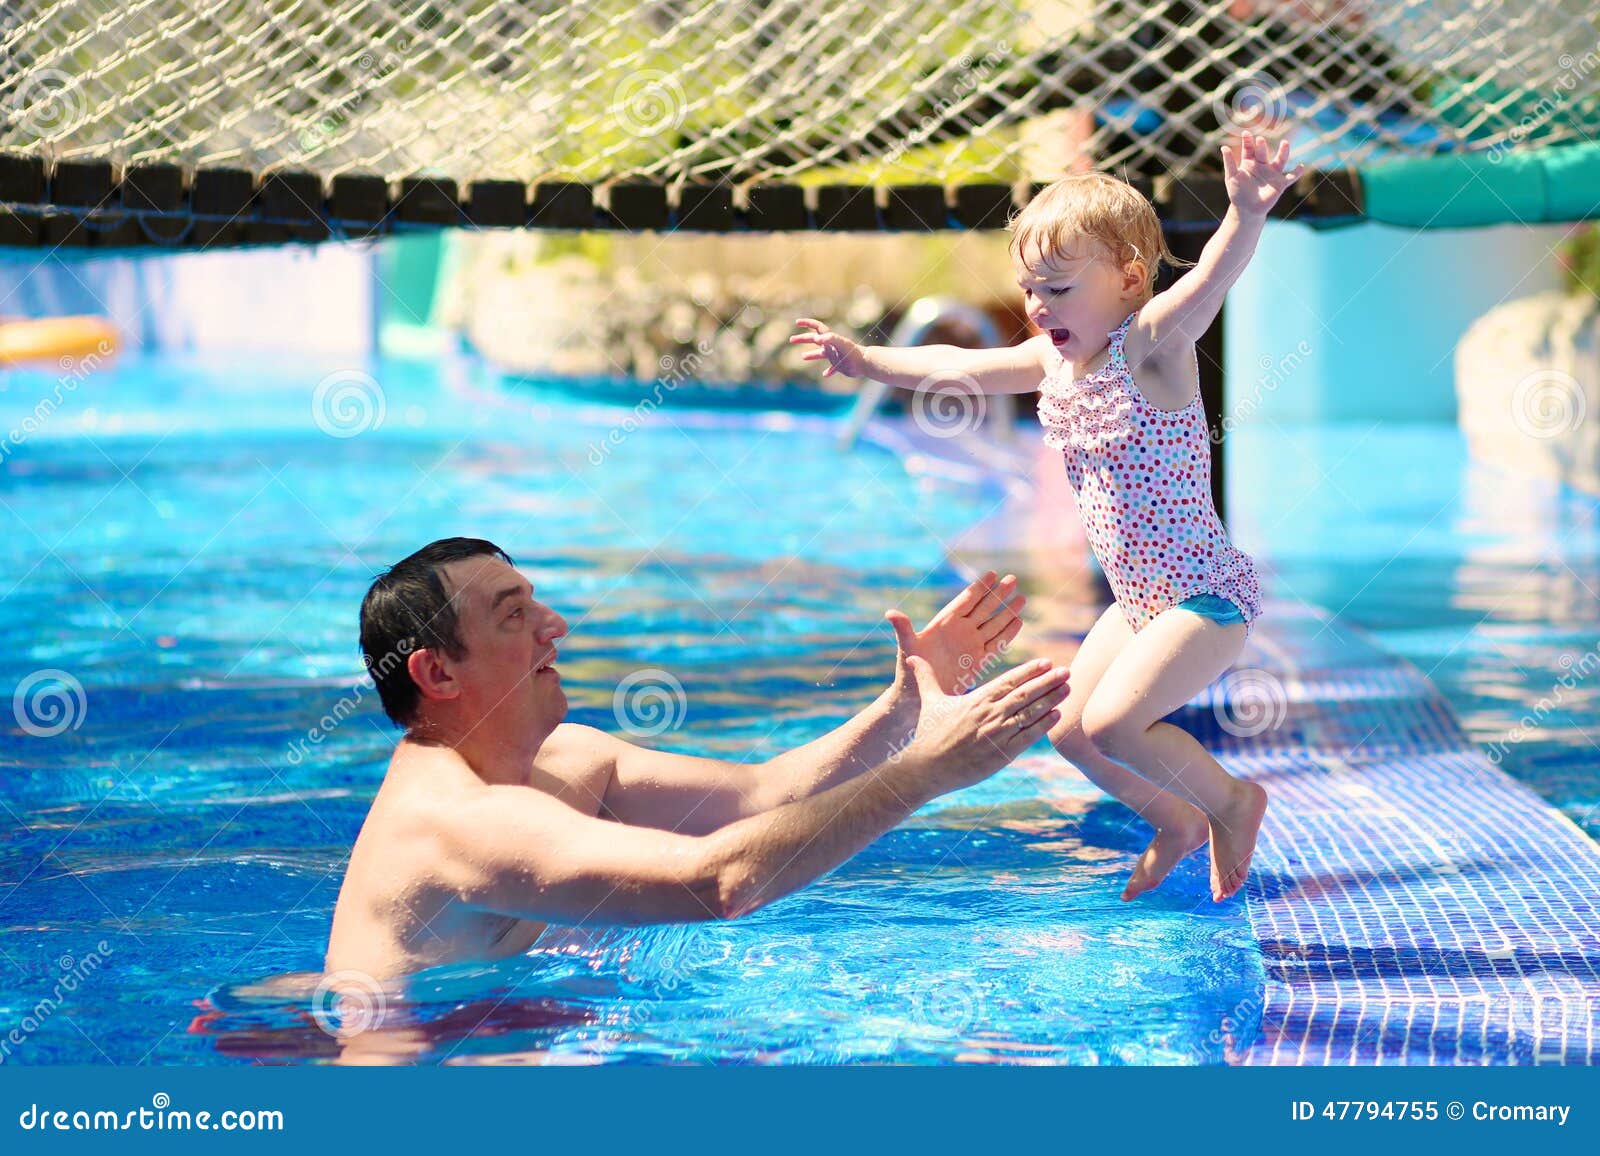 Father and daughter enjoying swimming pool. Happy family, active father with little child, adorable toddler girl, having fun together in outdoors swimming pool in water park during sunny summer sea vacation in tropical resort